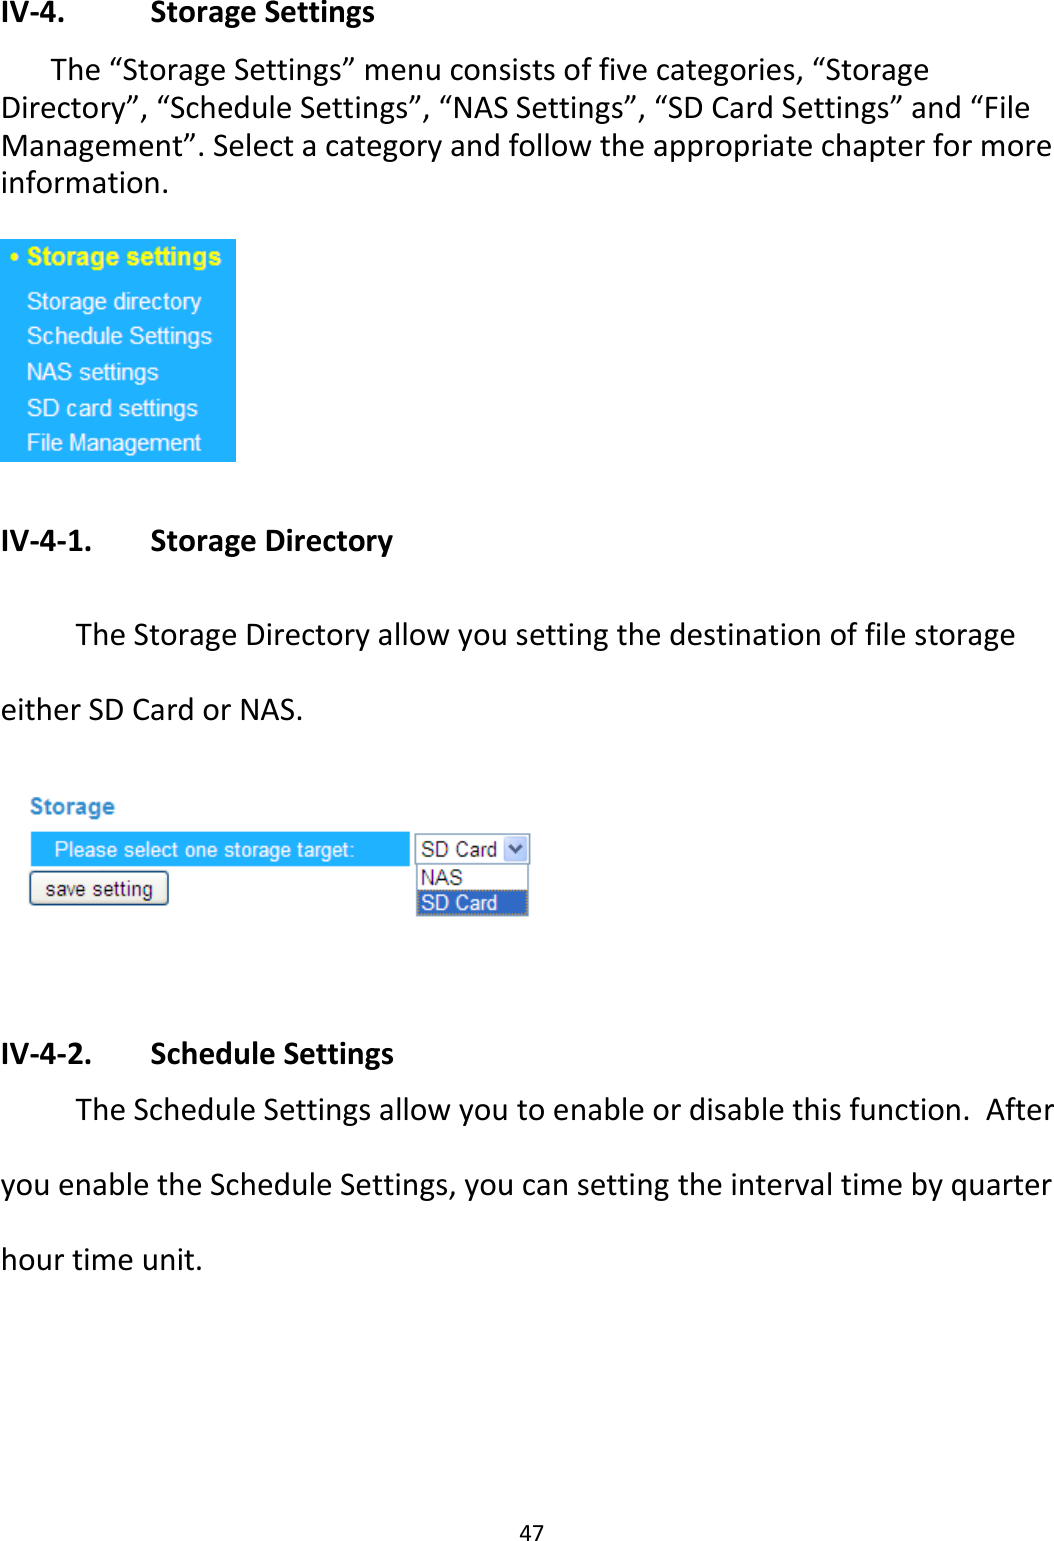 47  IV-4.    Storage Settings  The “Storage Settings” menu consists of five categories, “Storage Directory”, “Schedule Settings”, “NAS Settings”, “SD Card Settings” and “File Management”. Select a category and follow the appropriate chapter for more information.    IV-4-1.   Storage Directory   The Storage Directory allow you setting the destination of file storage either SD Card or NAS.   IV-4-2.   Schedule Settings   The Schedule Settings allow you to enable or disable this function.  After you enable the Schedule Settings, you can setting the interval time by quarter hour time unit.    